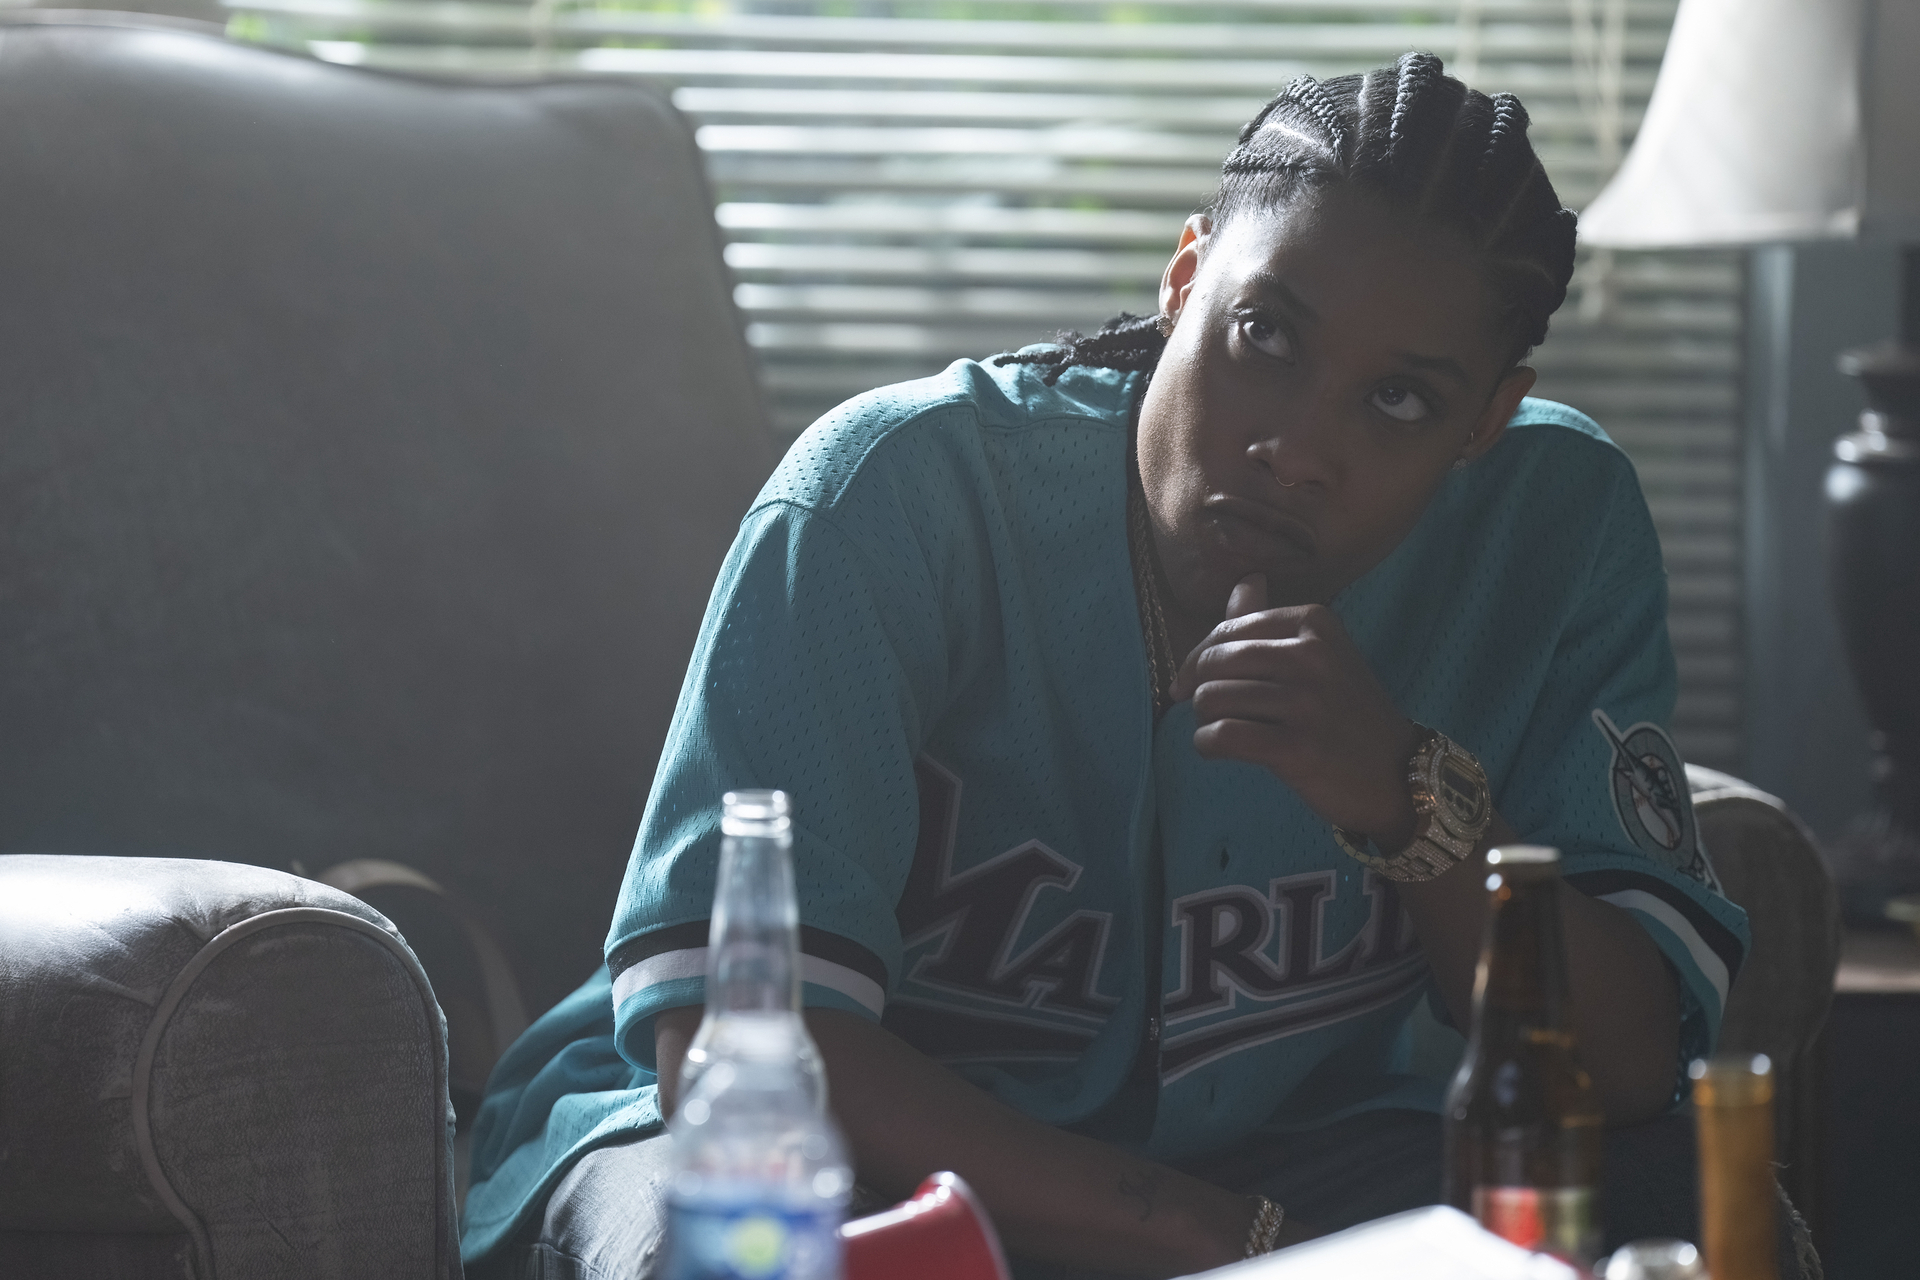 Chastity in a Marlins jersey leans on a couch, looking pensive, with beverages on the table